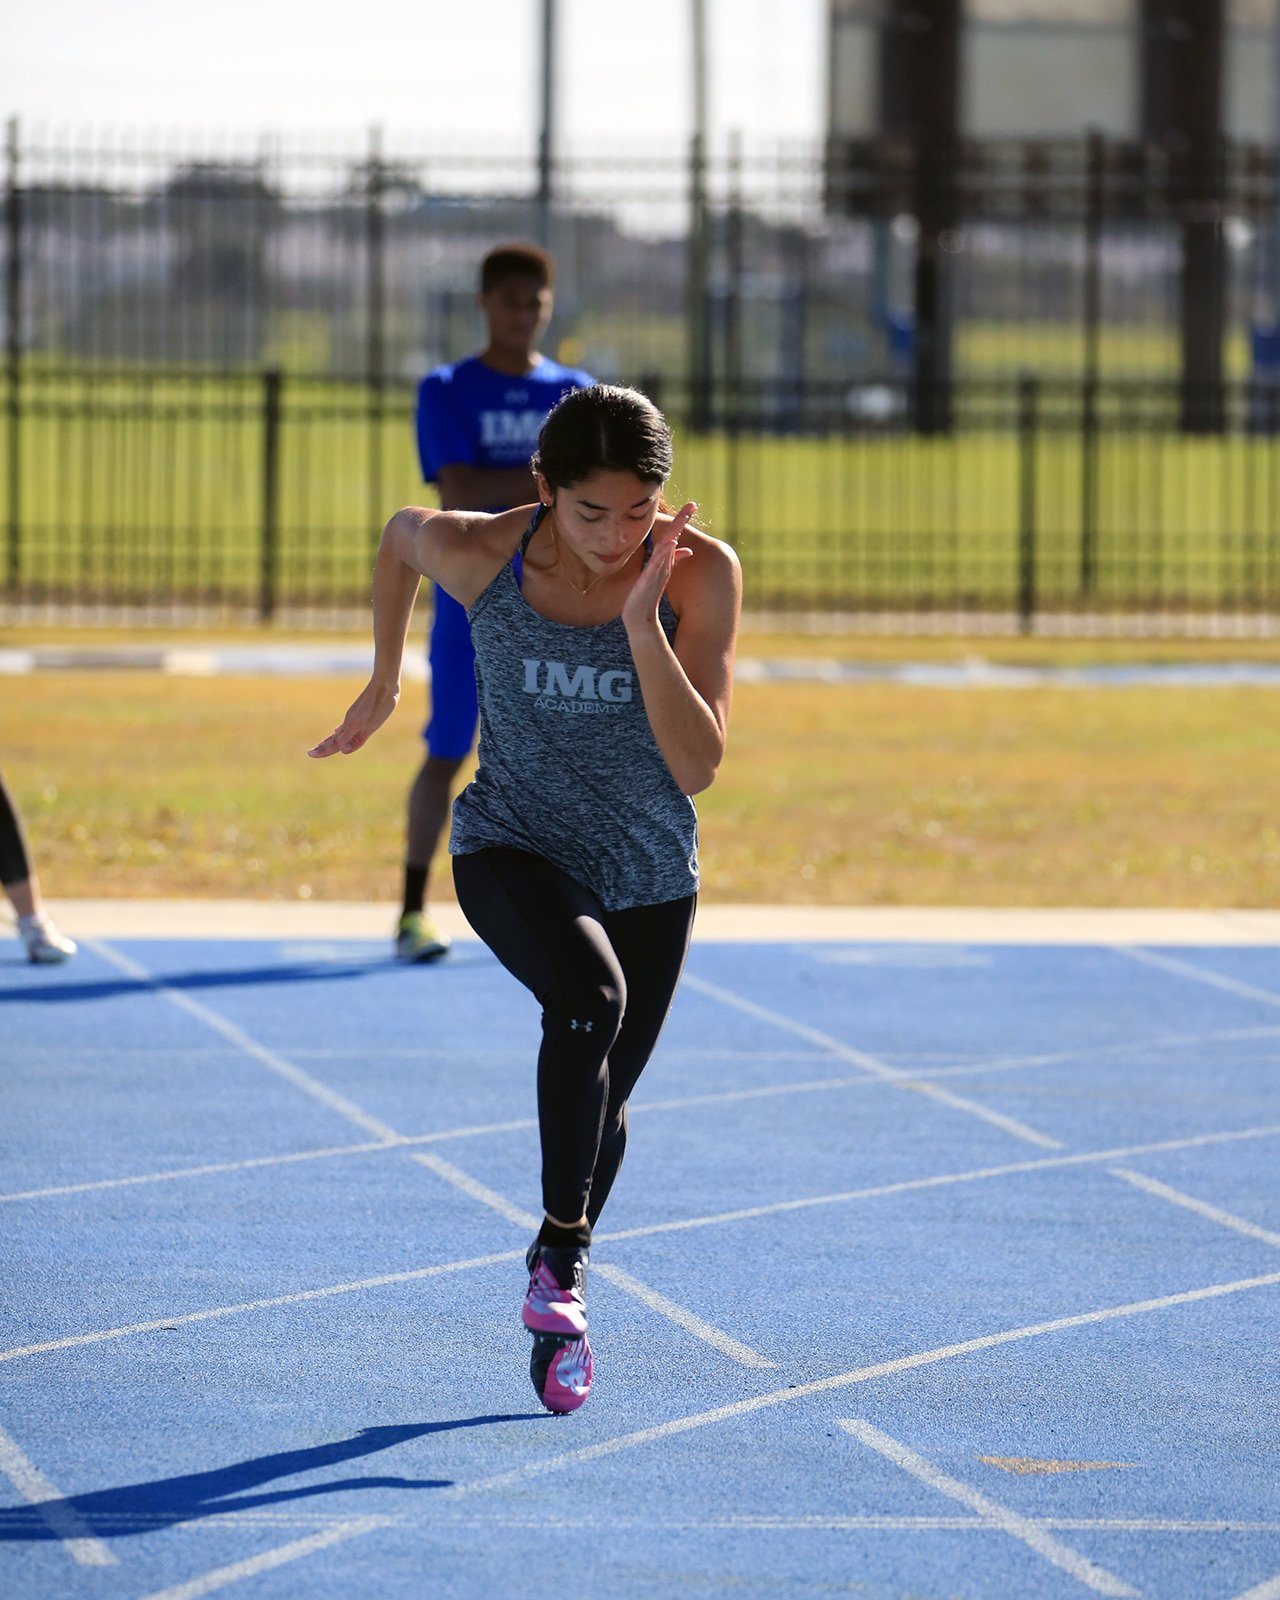 Girls Track and Field Camp Cross Country Camp IMG Academy